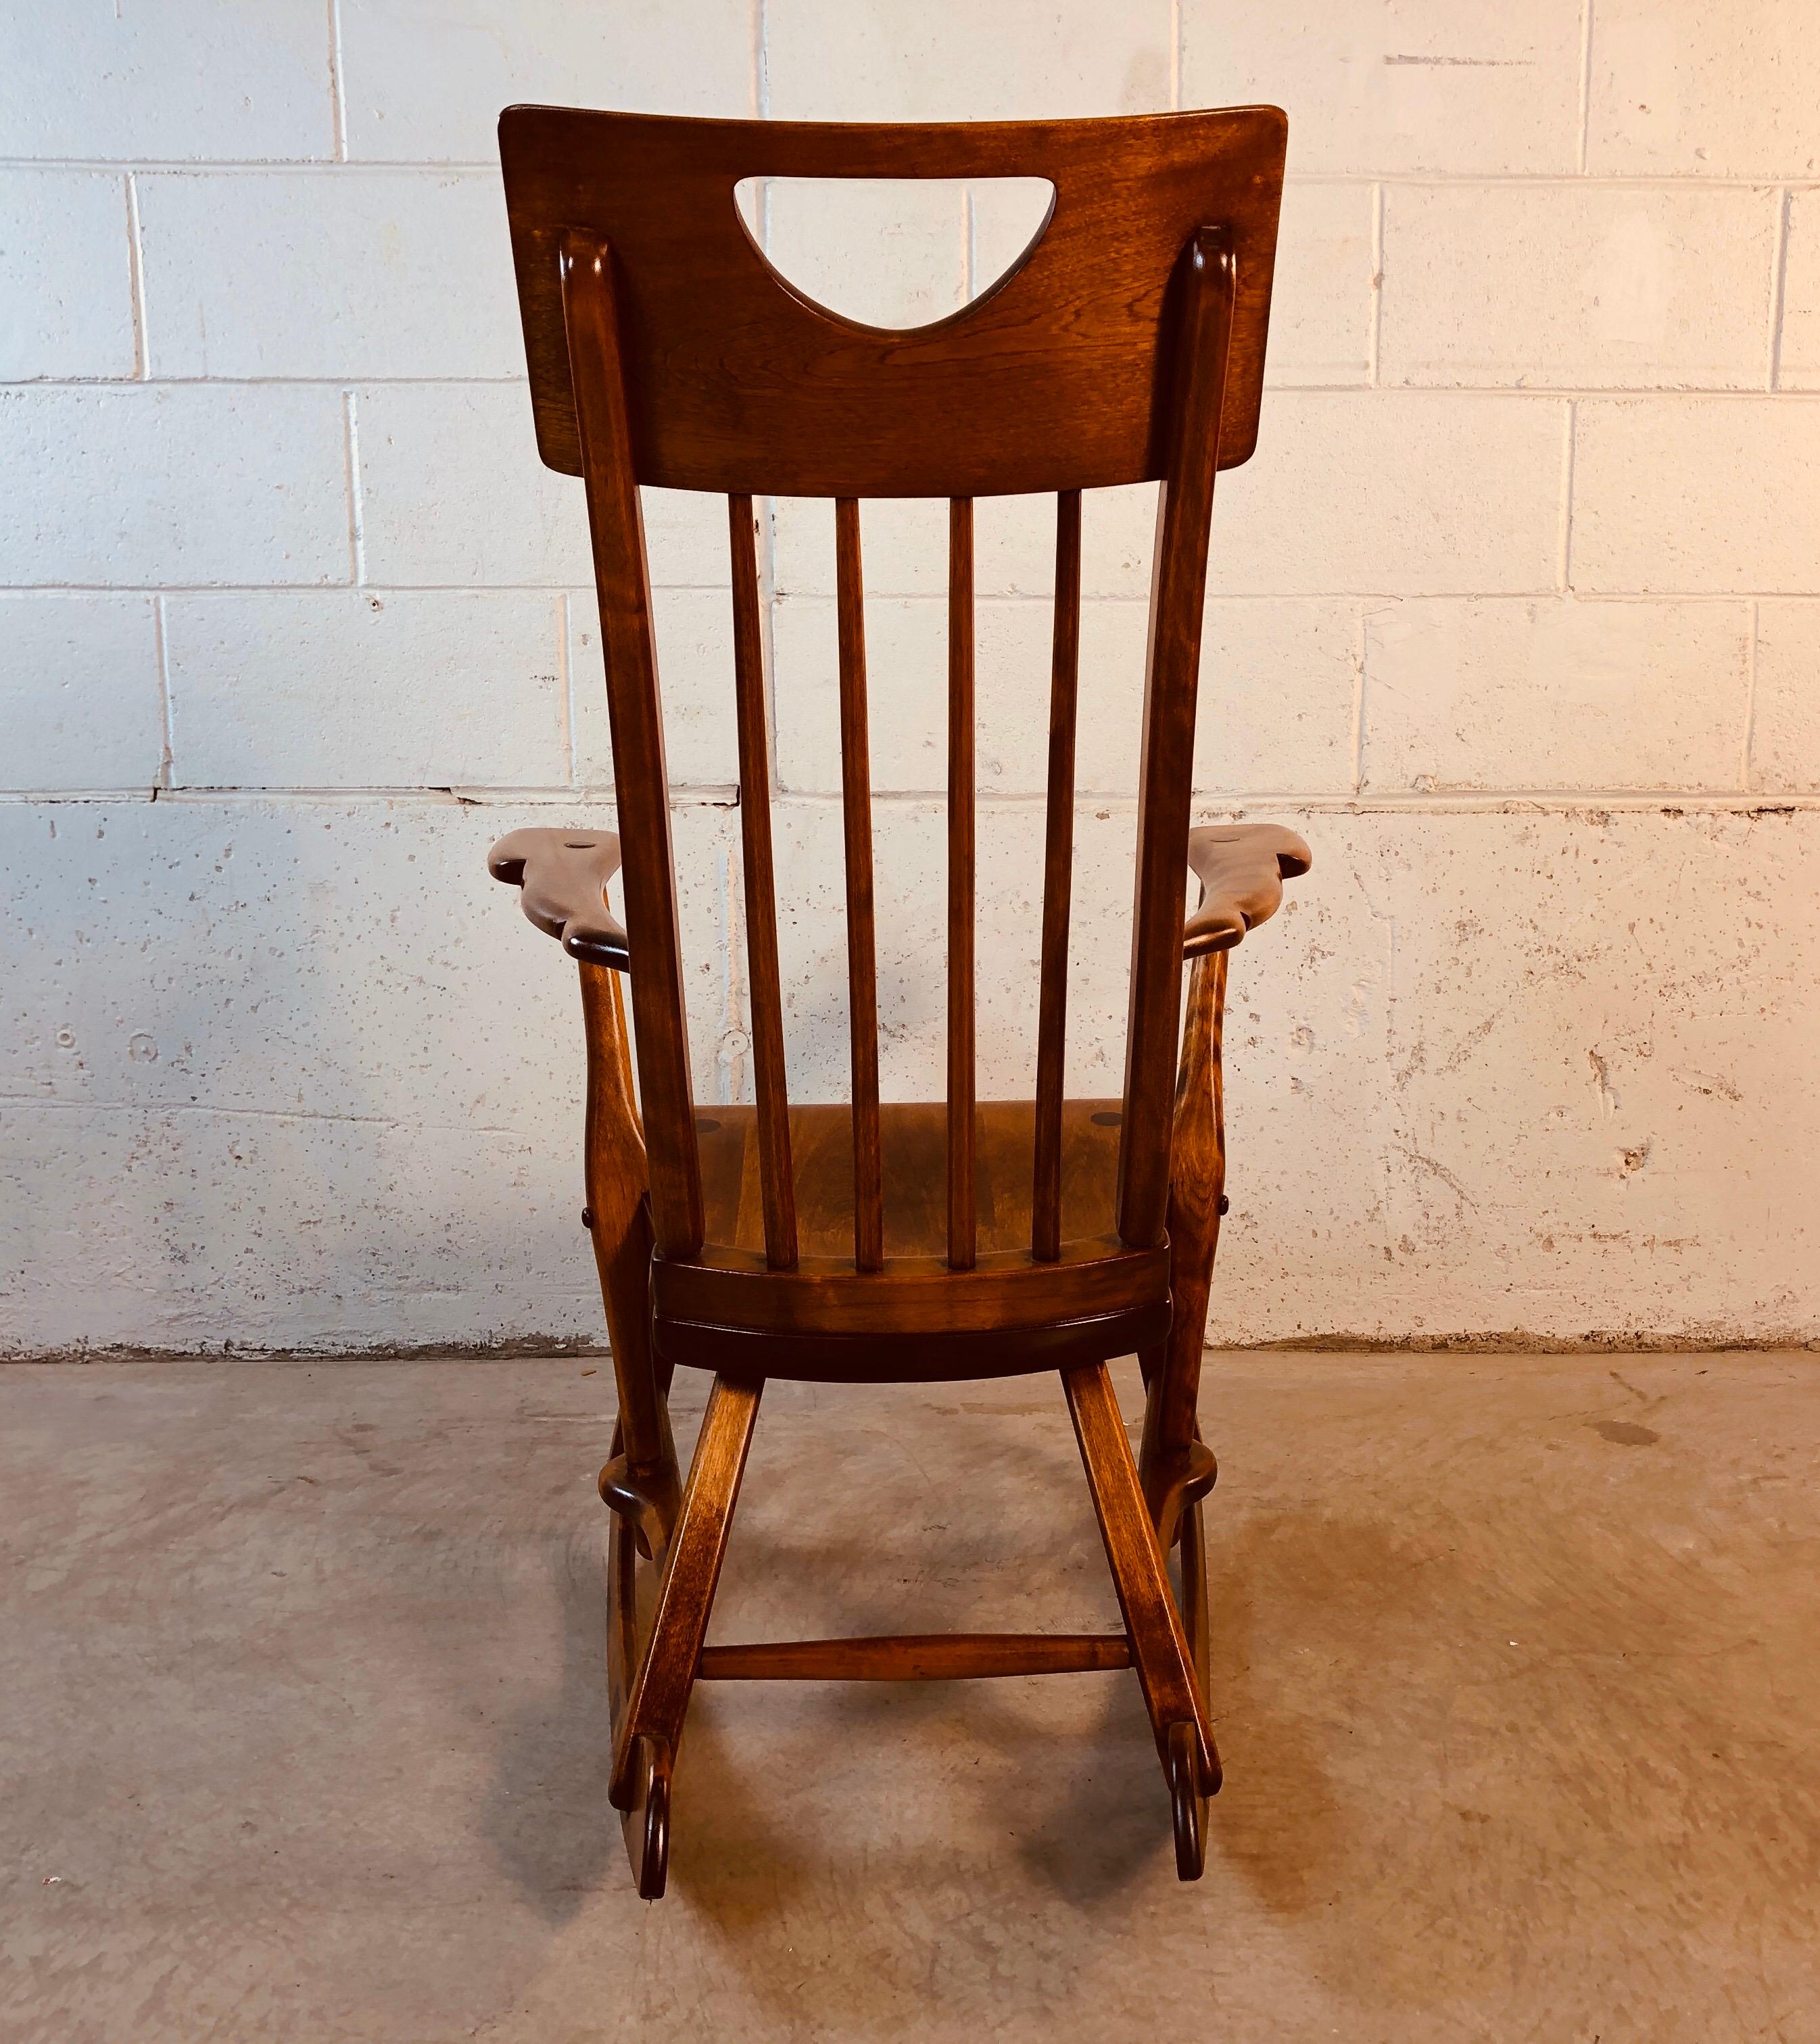 20th Century Colonial American High-Back Rocking Chair by Herman De Vries for Sikes Furniture